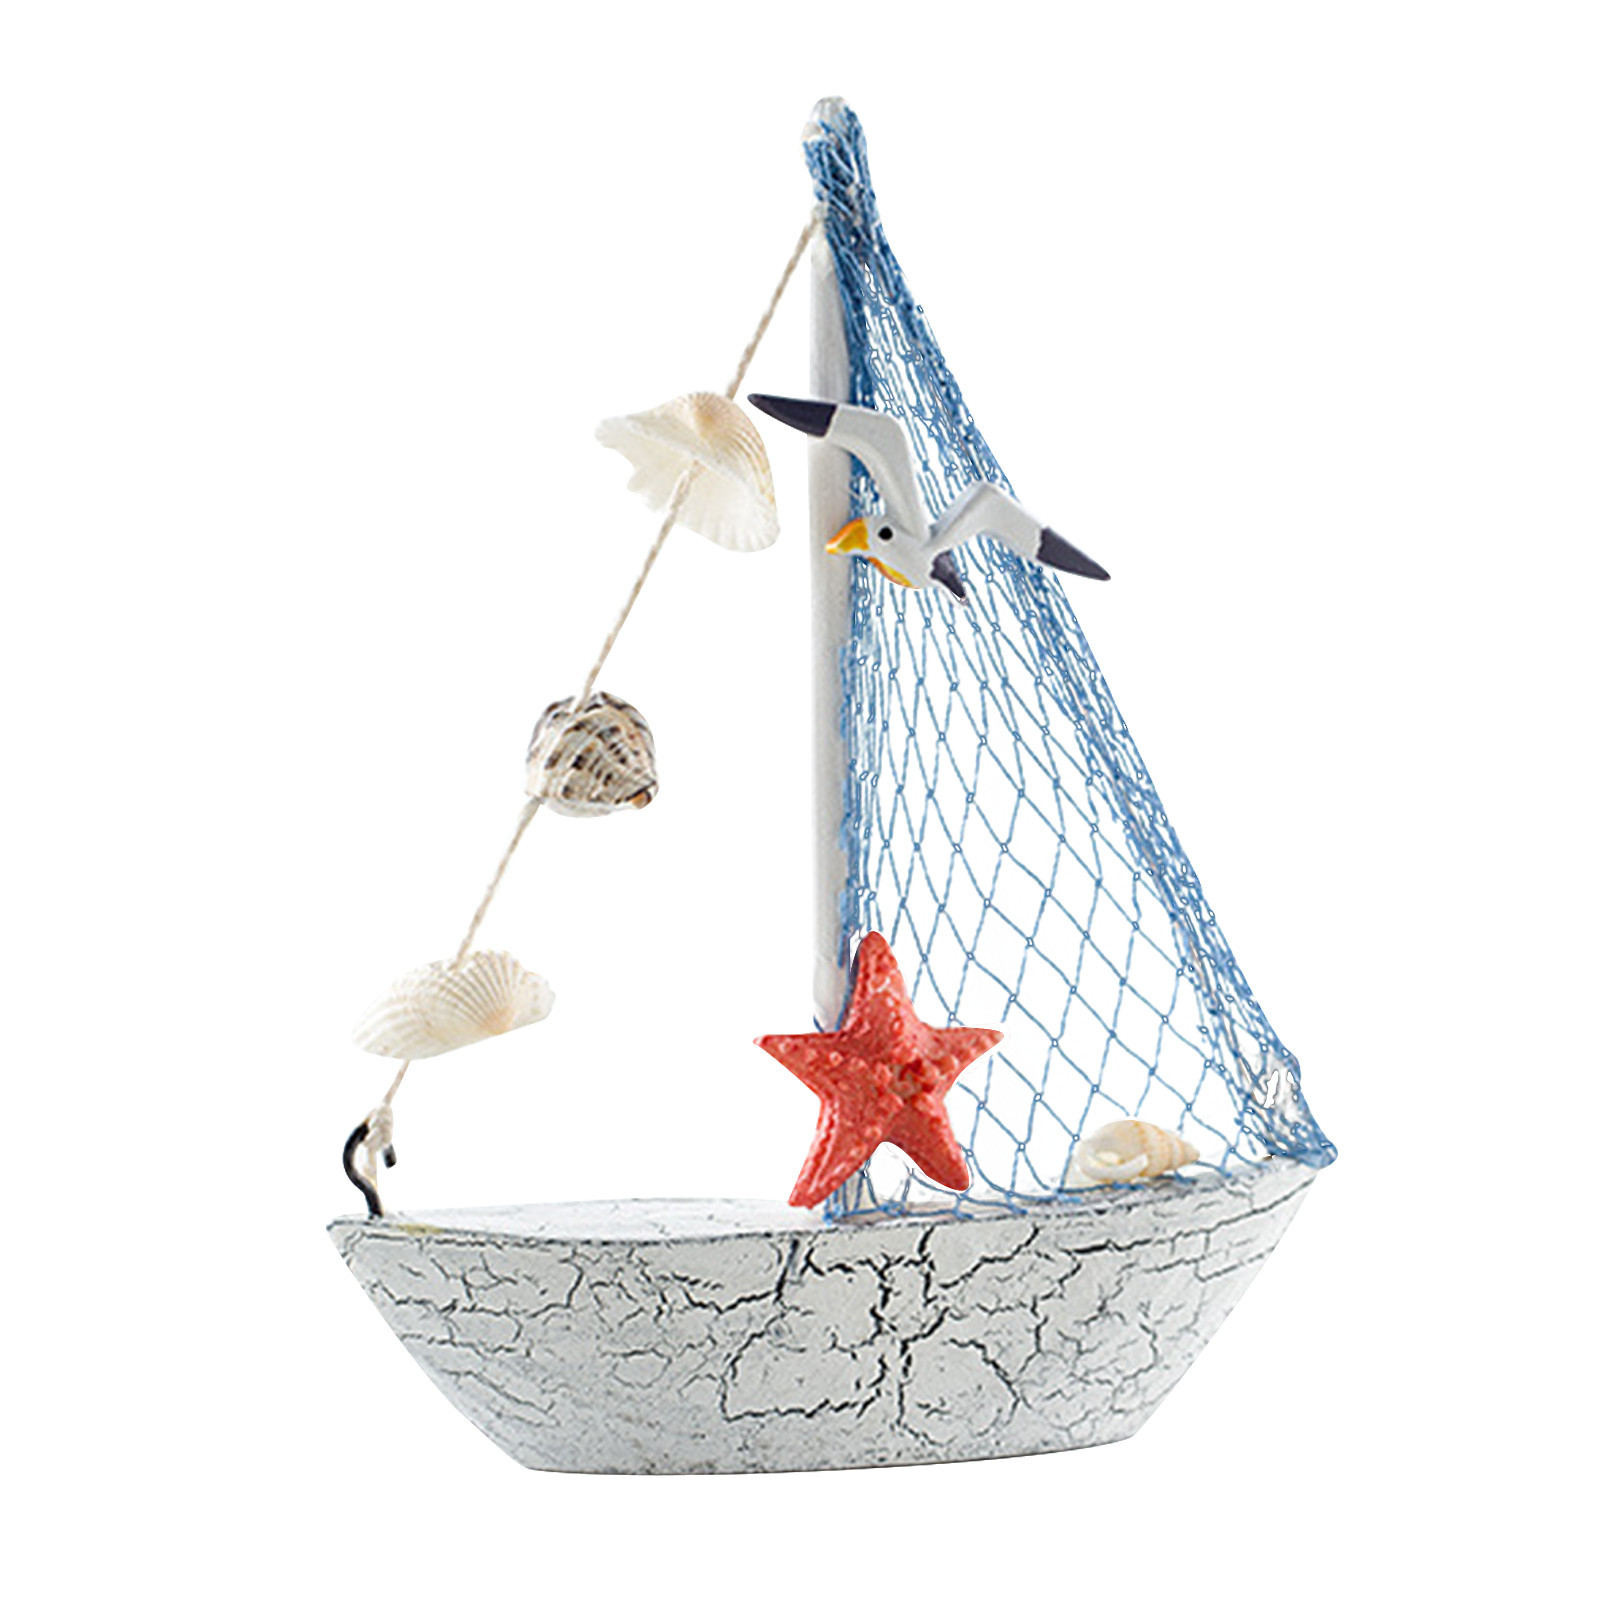 Large Ornament Home Nautical Wooden Sailboat Ornament Beach Decoration ...